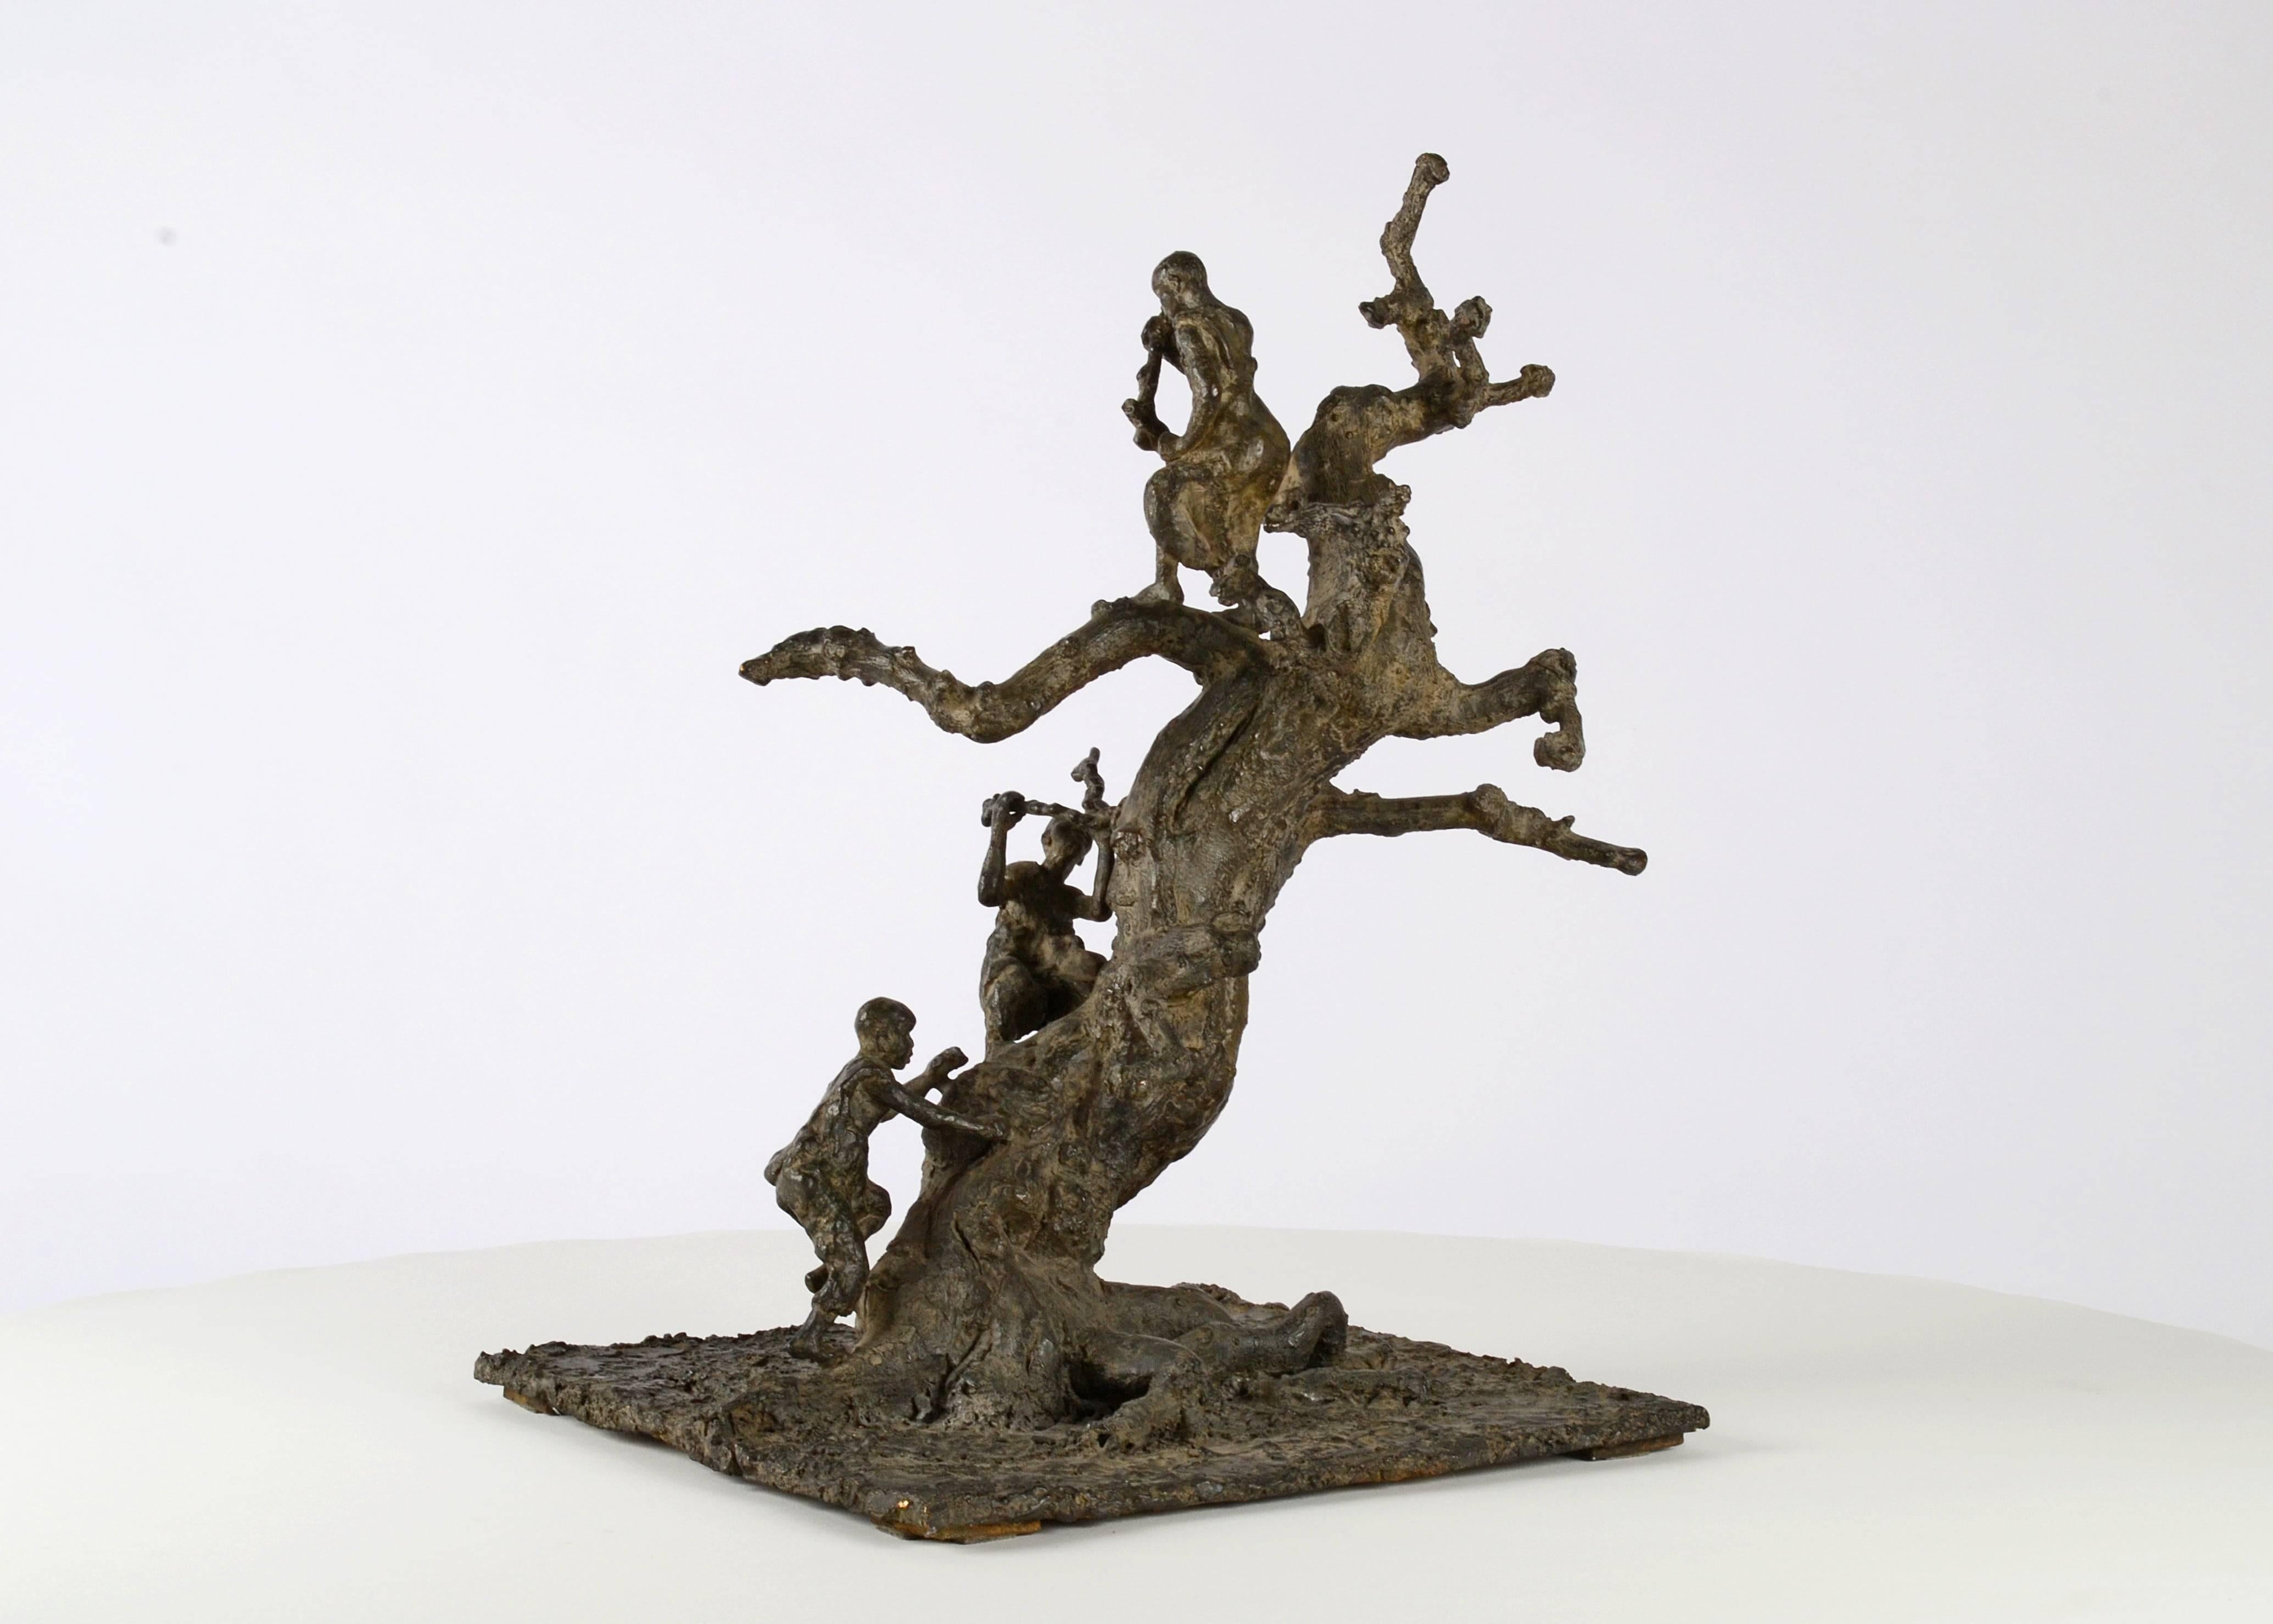 Tree With Children (Arbre aux Enfants) is a bronze sculpture by French contemporary artist Marine de Soos. It represents three young boys climbing a tree. This sculpture is part of the “Figure” series. It is available in a limited edition of 8